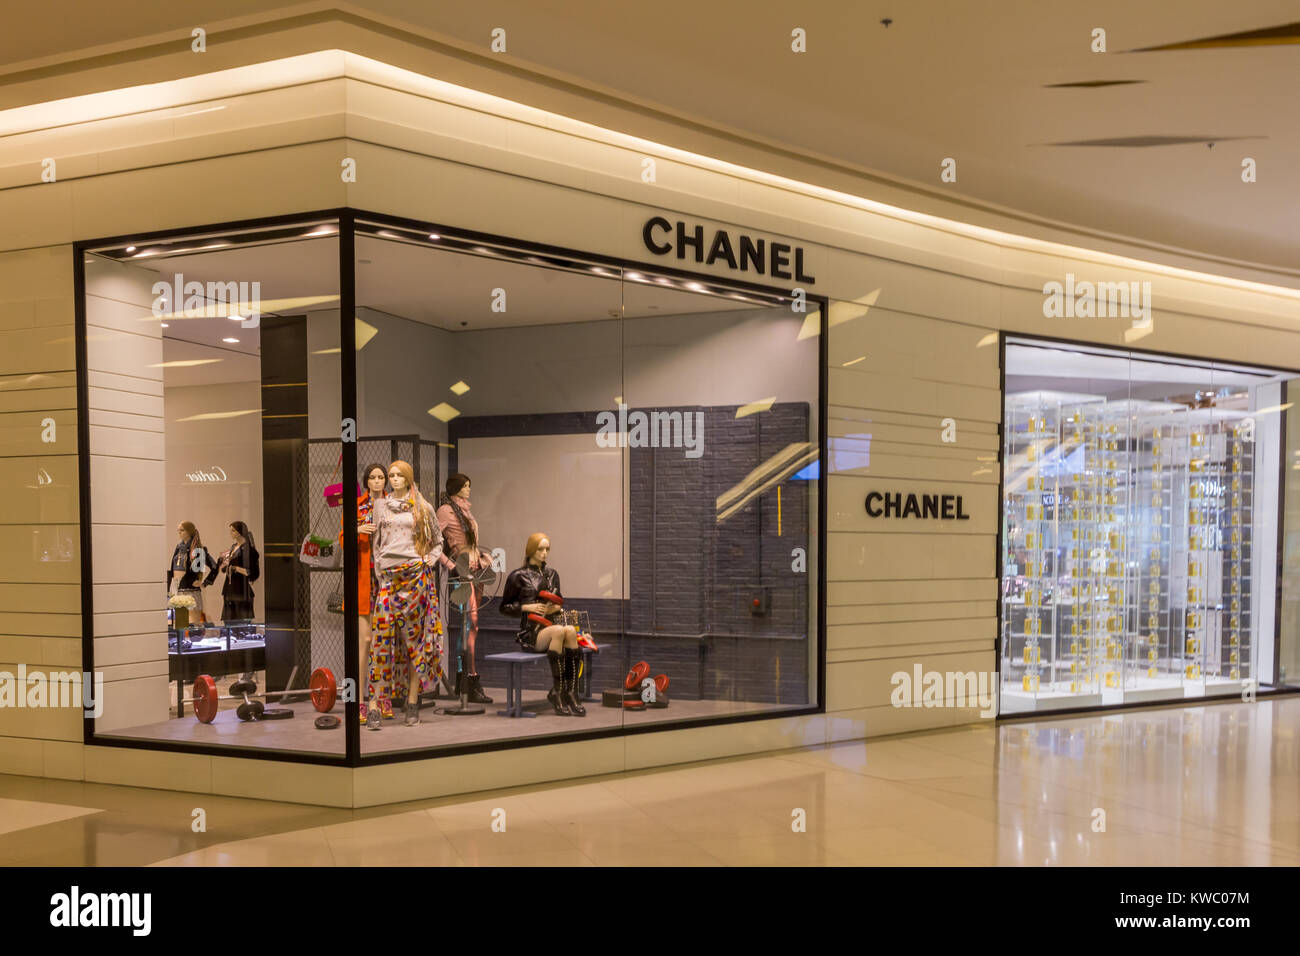 Chanel store in Siam Paragon mall, Bangkok, Thailand Stock Photo - Alamy